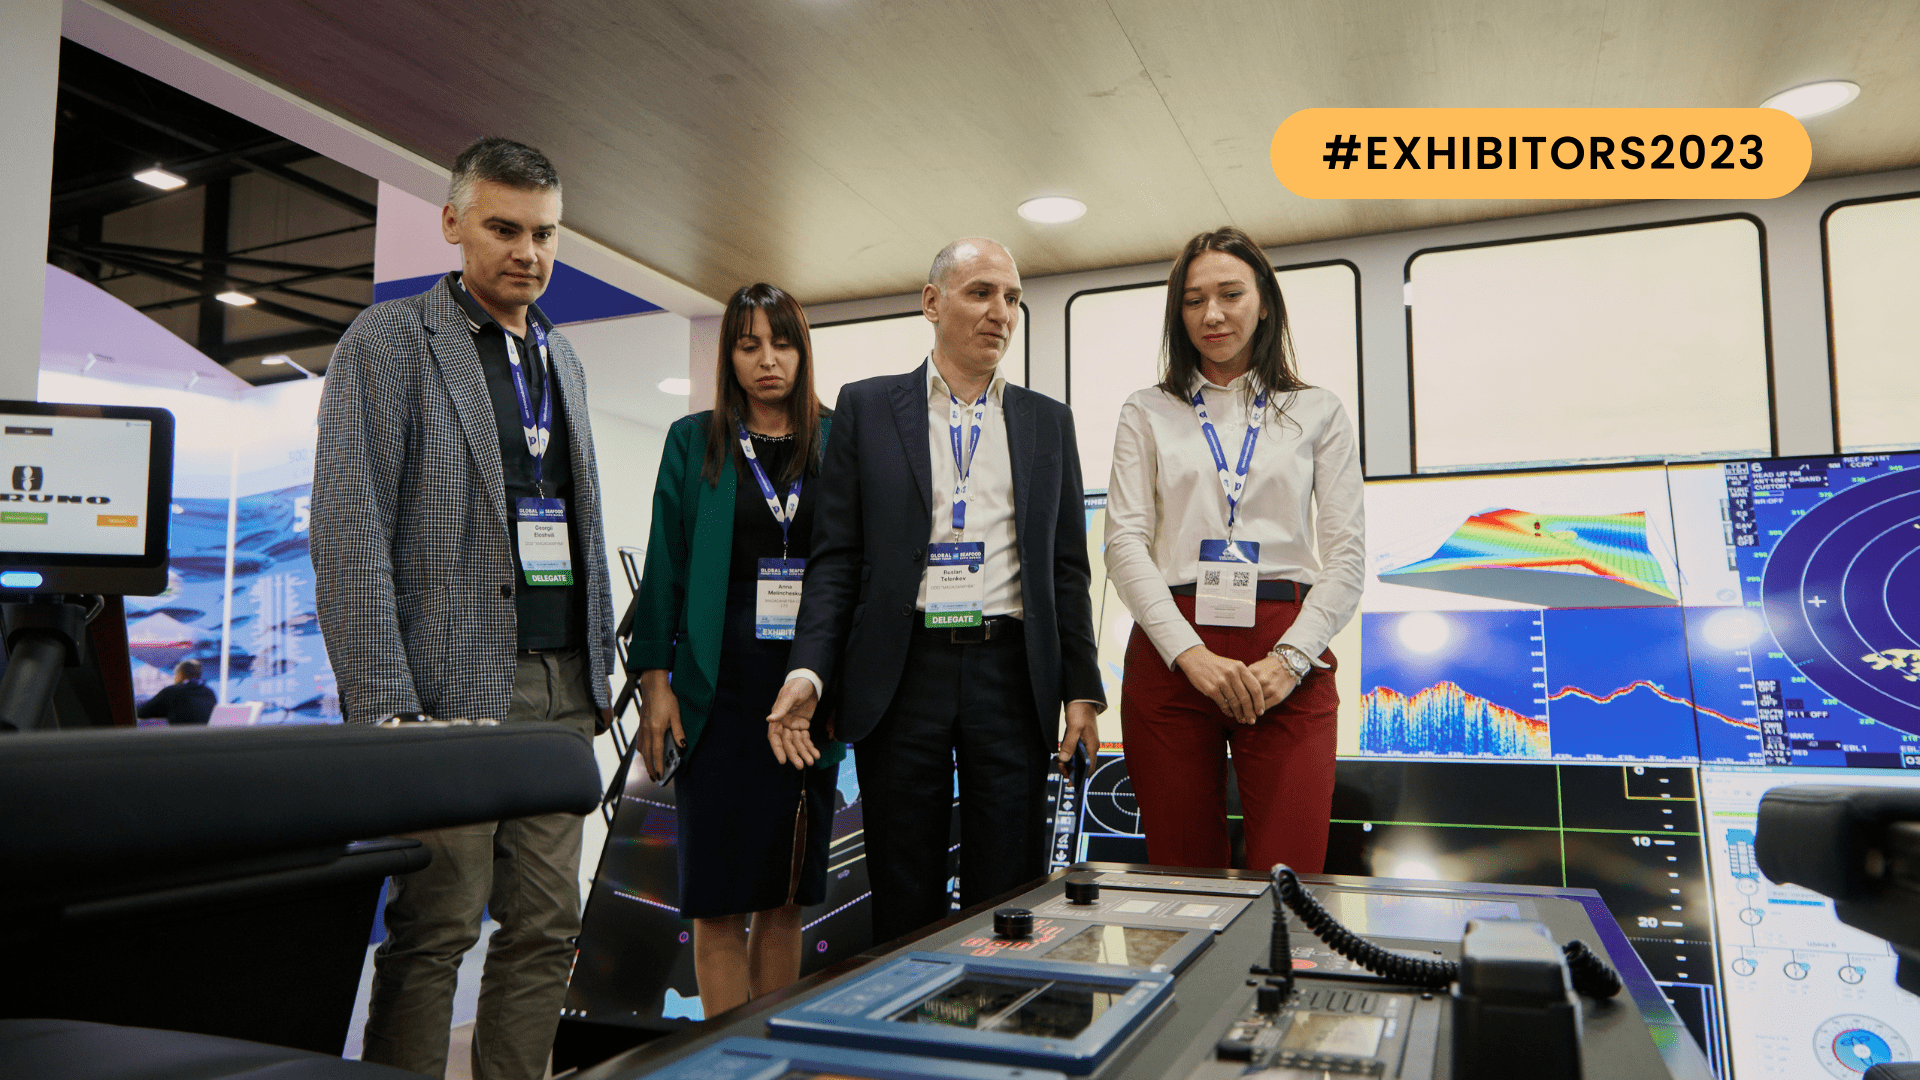 Seafood Expo Russia 2023: Overview of New Exhibitors No. 5